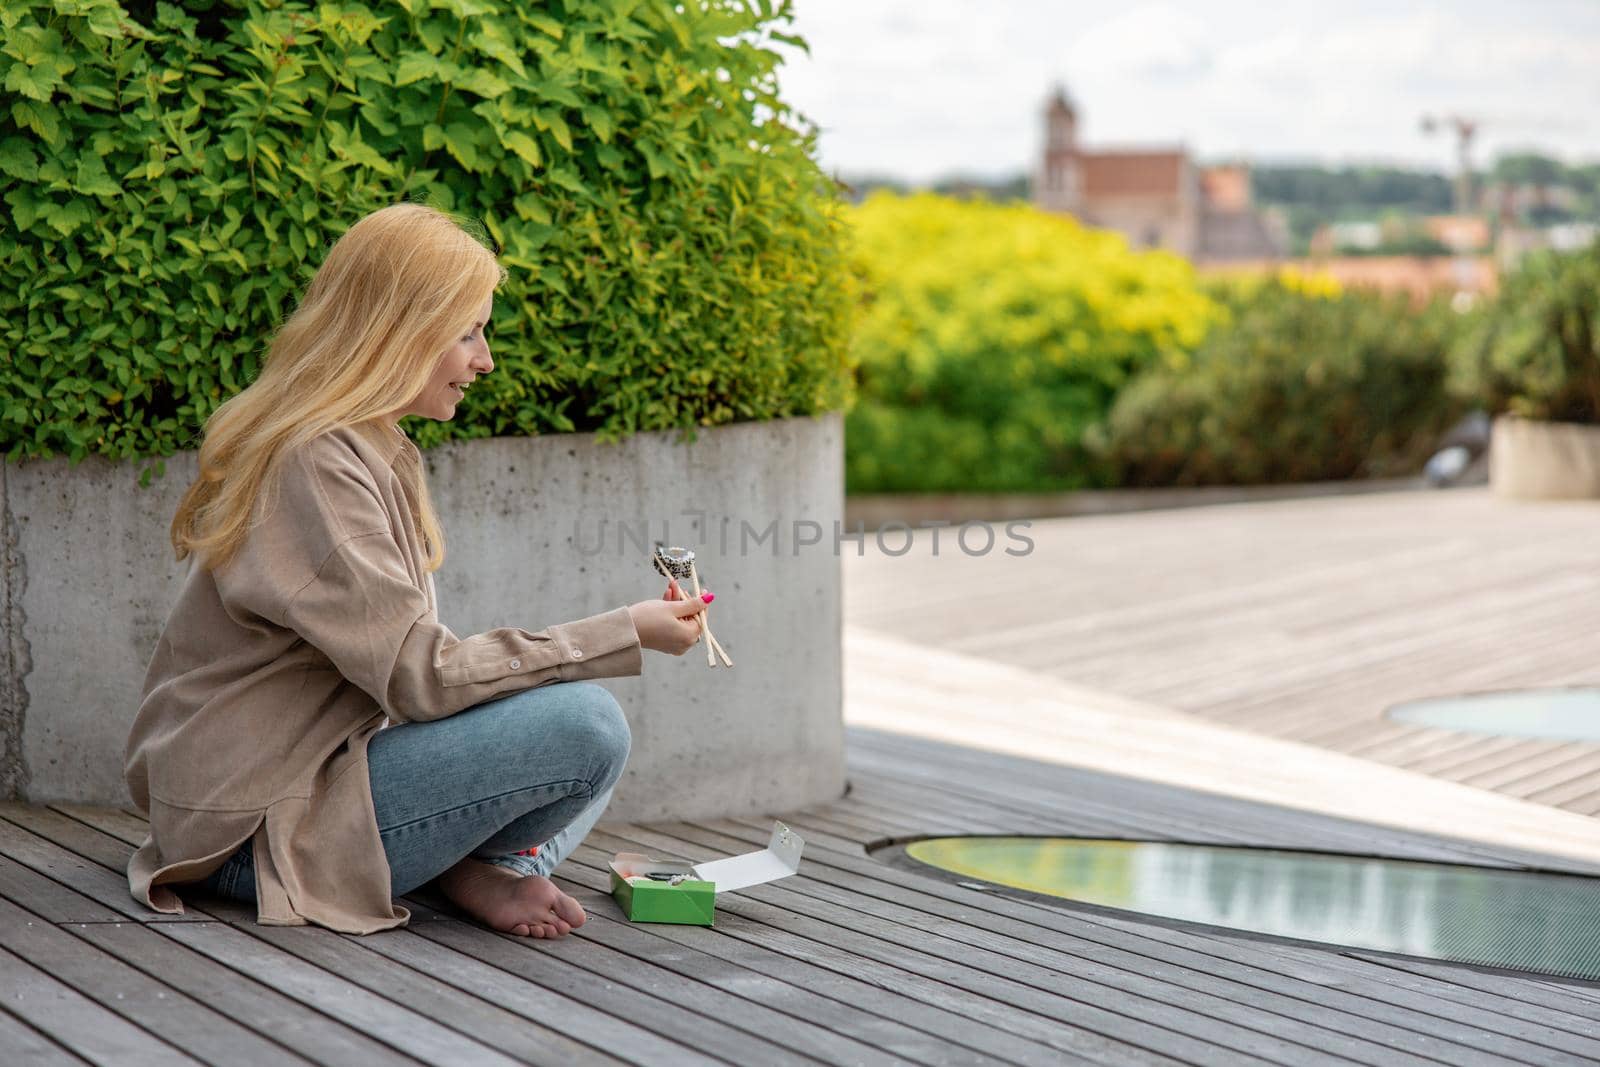 Young beautiful blond woman eating sushi outdoors, on the wooden terrace, by modern building in the city. Tasty food to go. Girl has lunch break, spending time outside, eating Asian food. City life